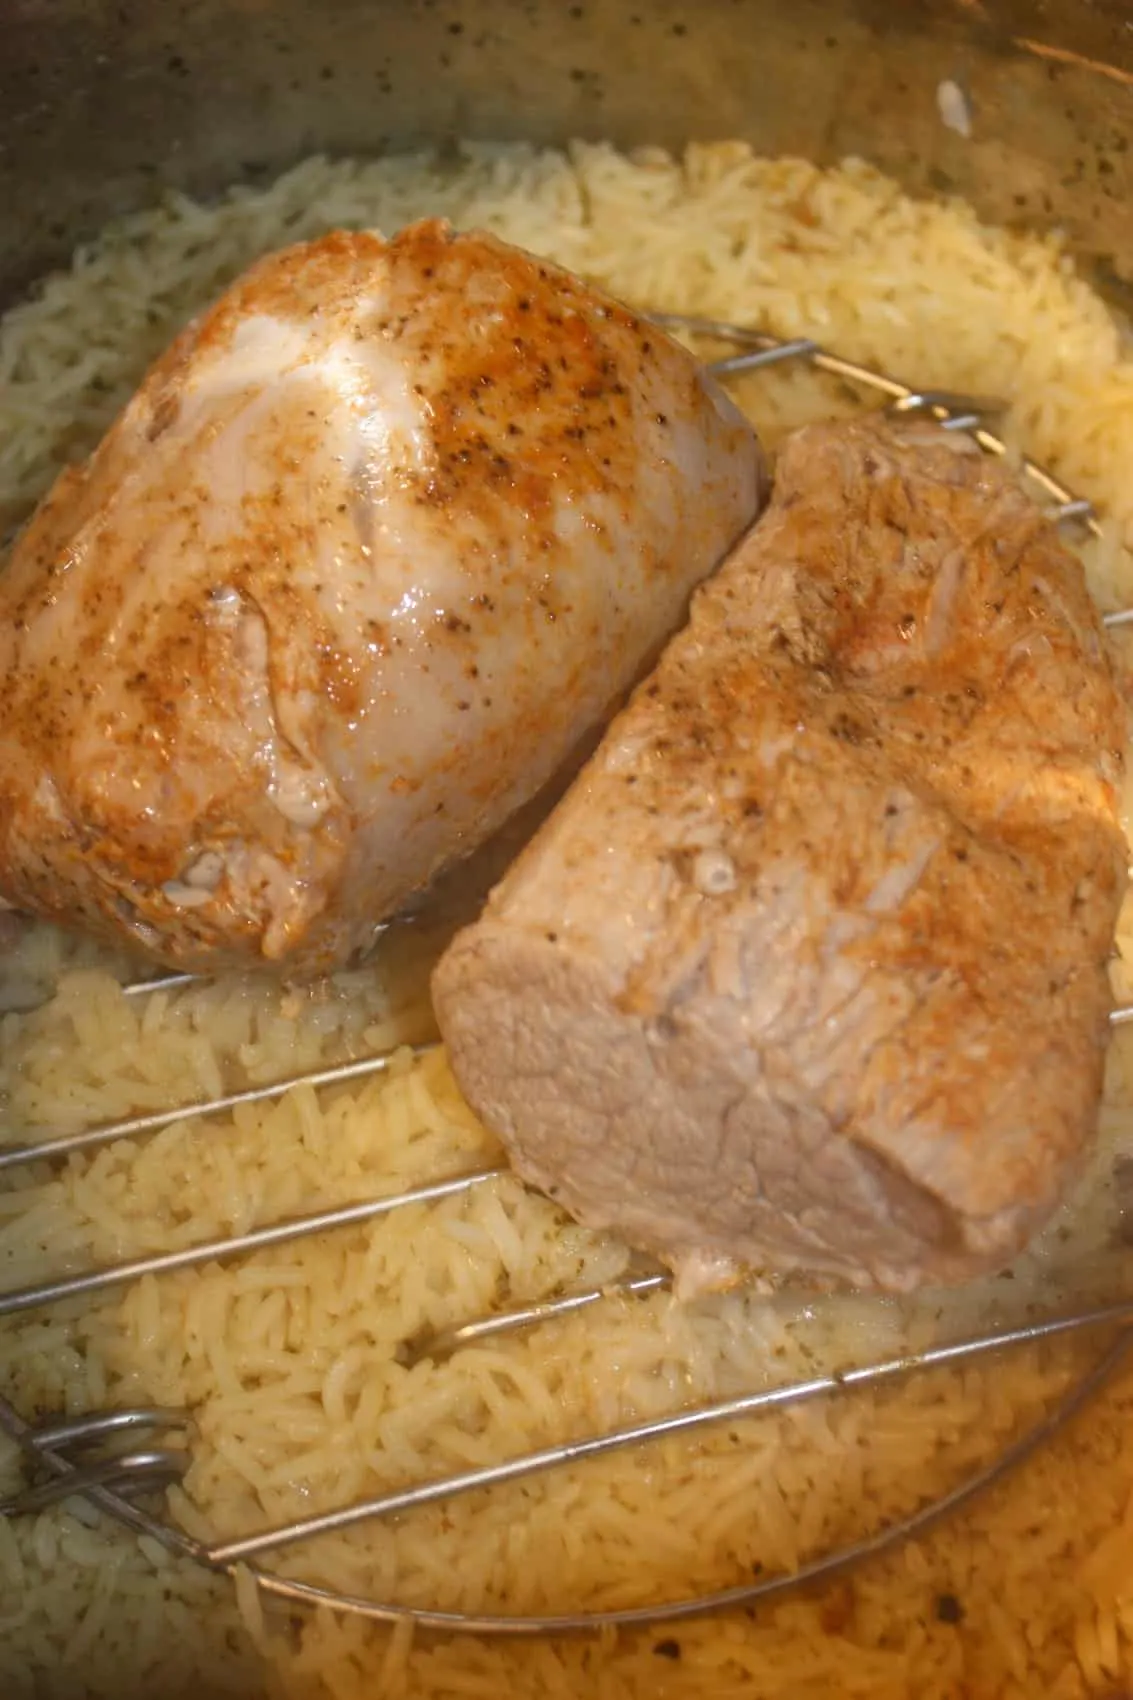 Instant Pot Pork Tenderloin and Rice is a simple meal that can be dressed up easily for any special occasion.